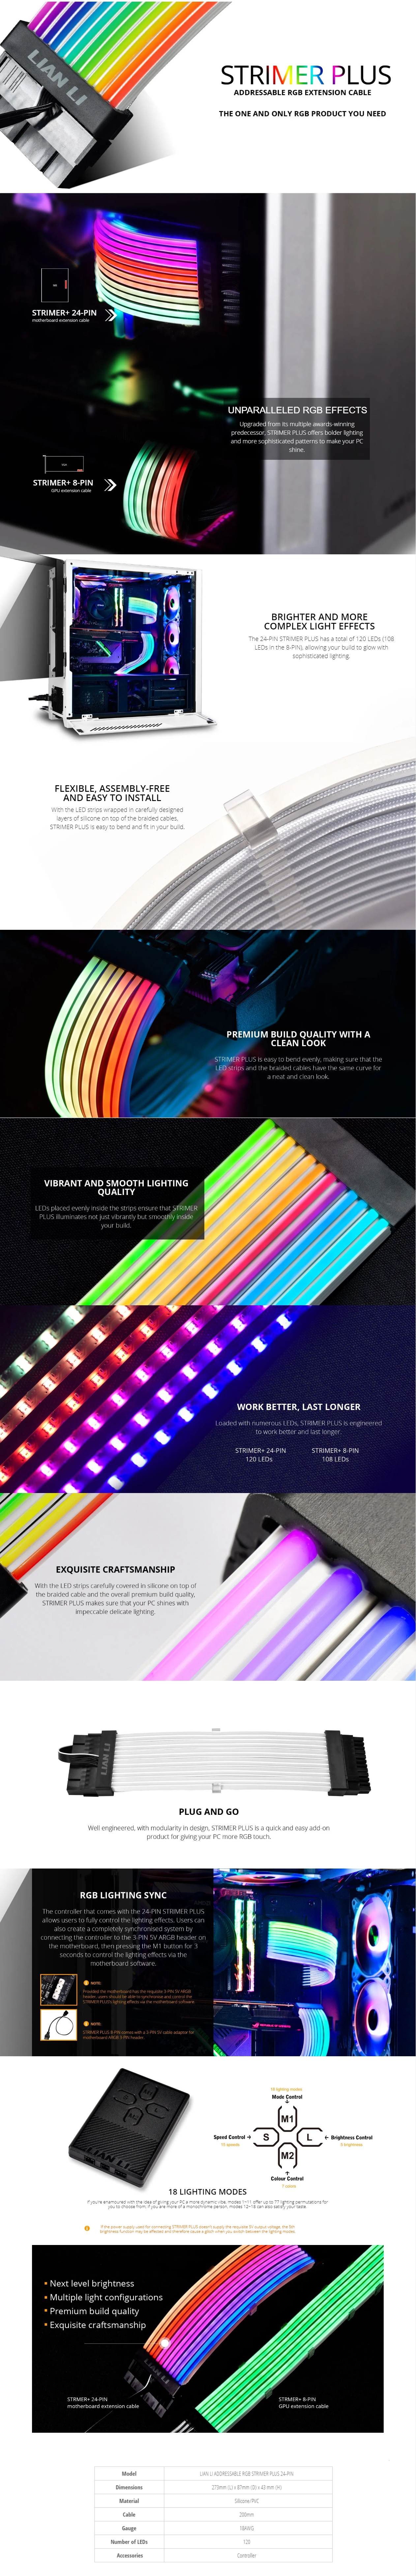 A large marketing image providing additional information about the product Lian-Li Strimer Plus 24-Pin ATX ARGB LED Extension Cable - Additional alt info not provided